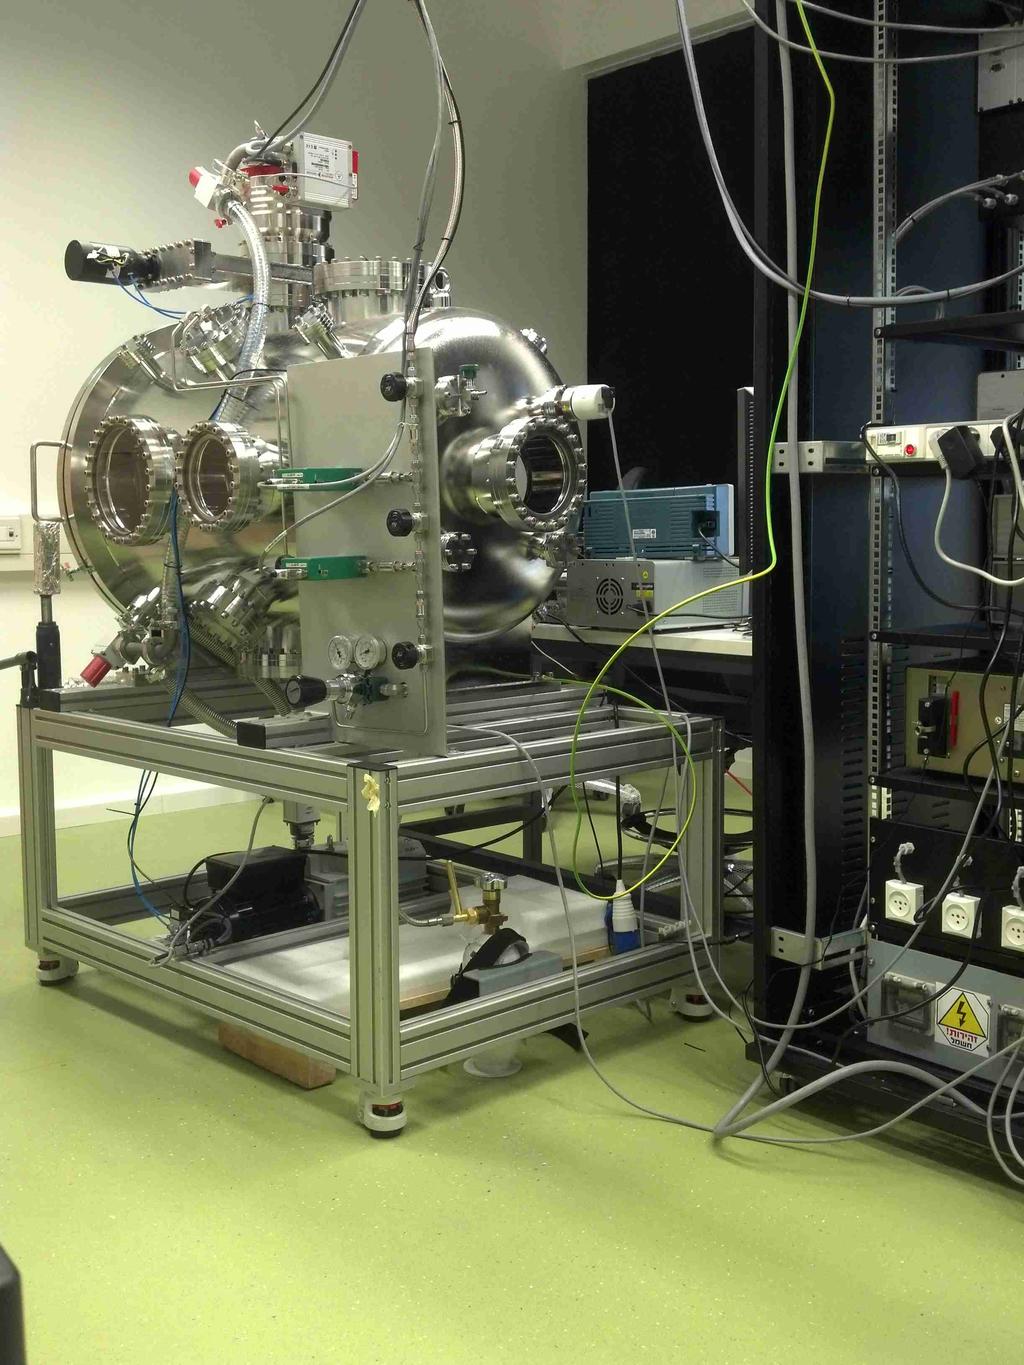 Experimental Setup/Aerospace Plasma Laboratory APL is part of the Faculty of Aerospace Engineering and is located in the Asher Space Research Institute, Technion The centerpiece of the Aerospace